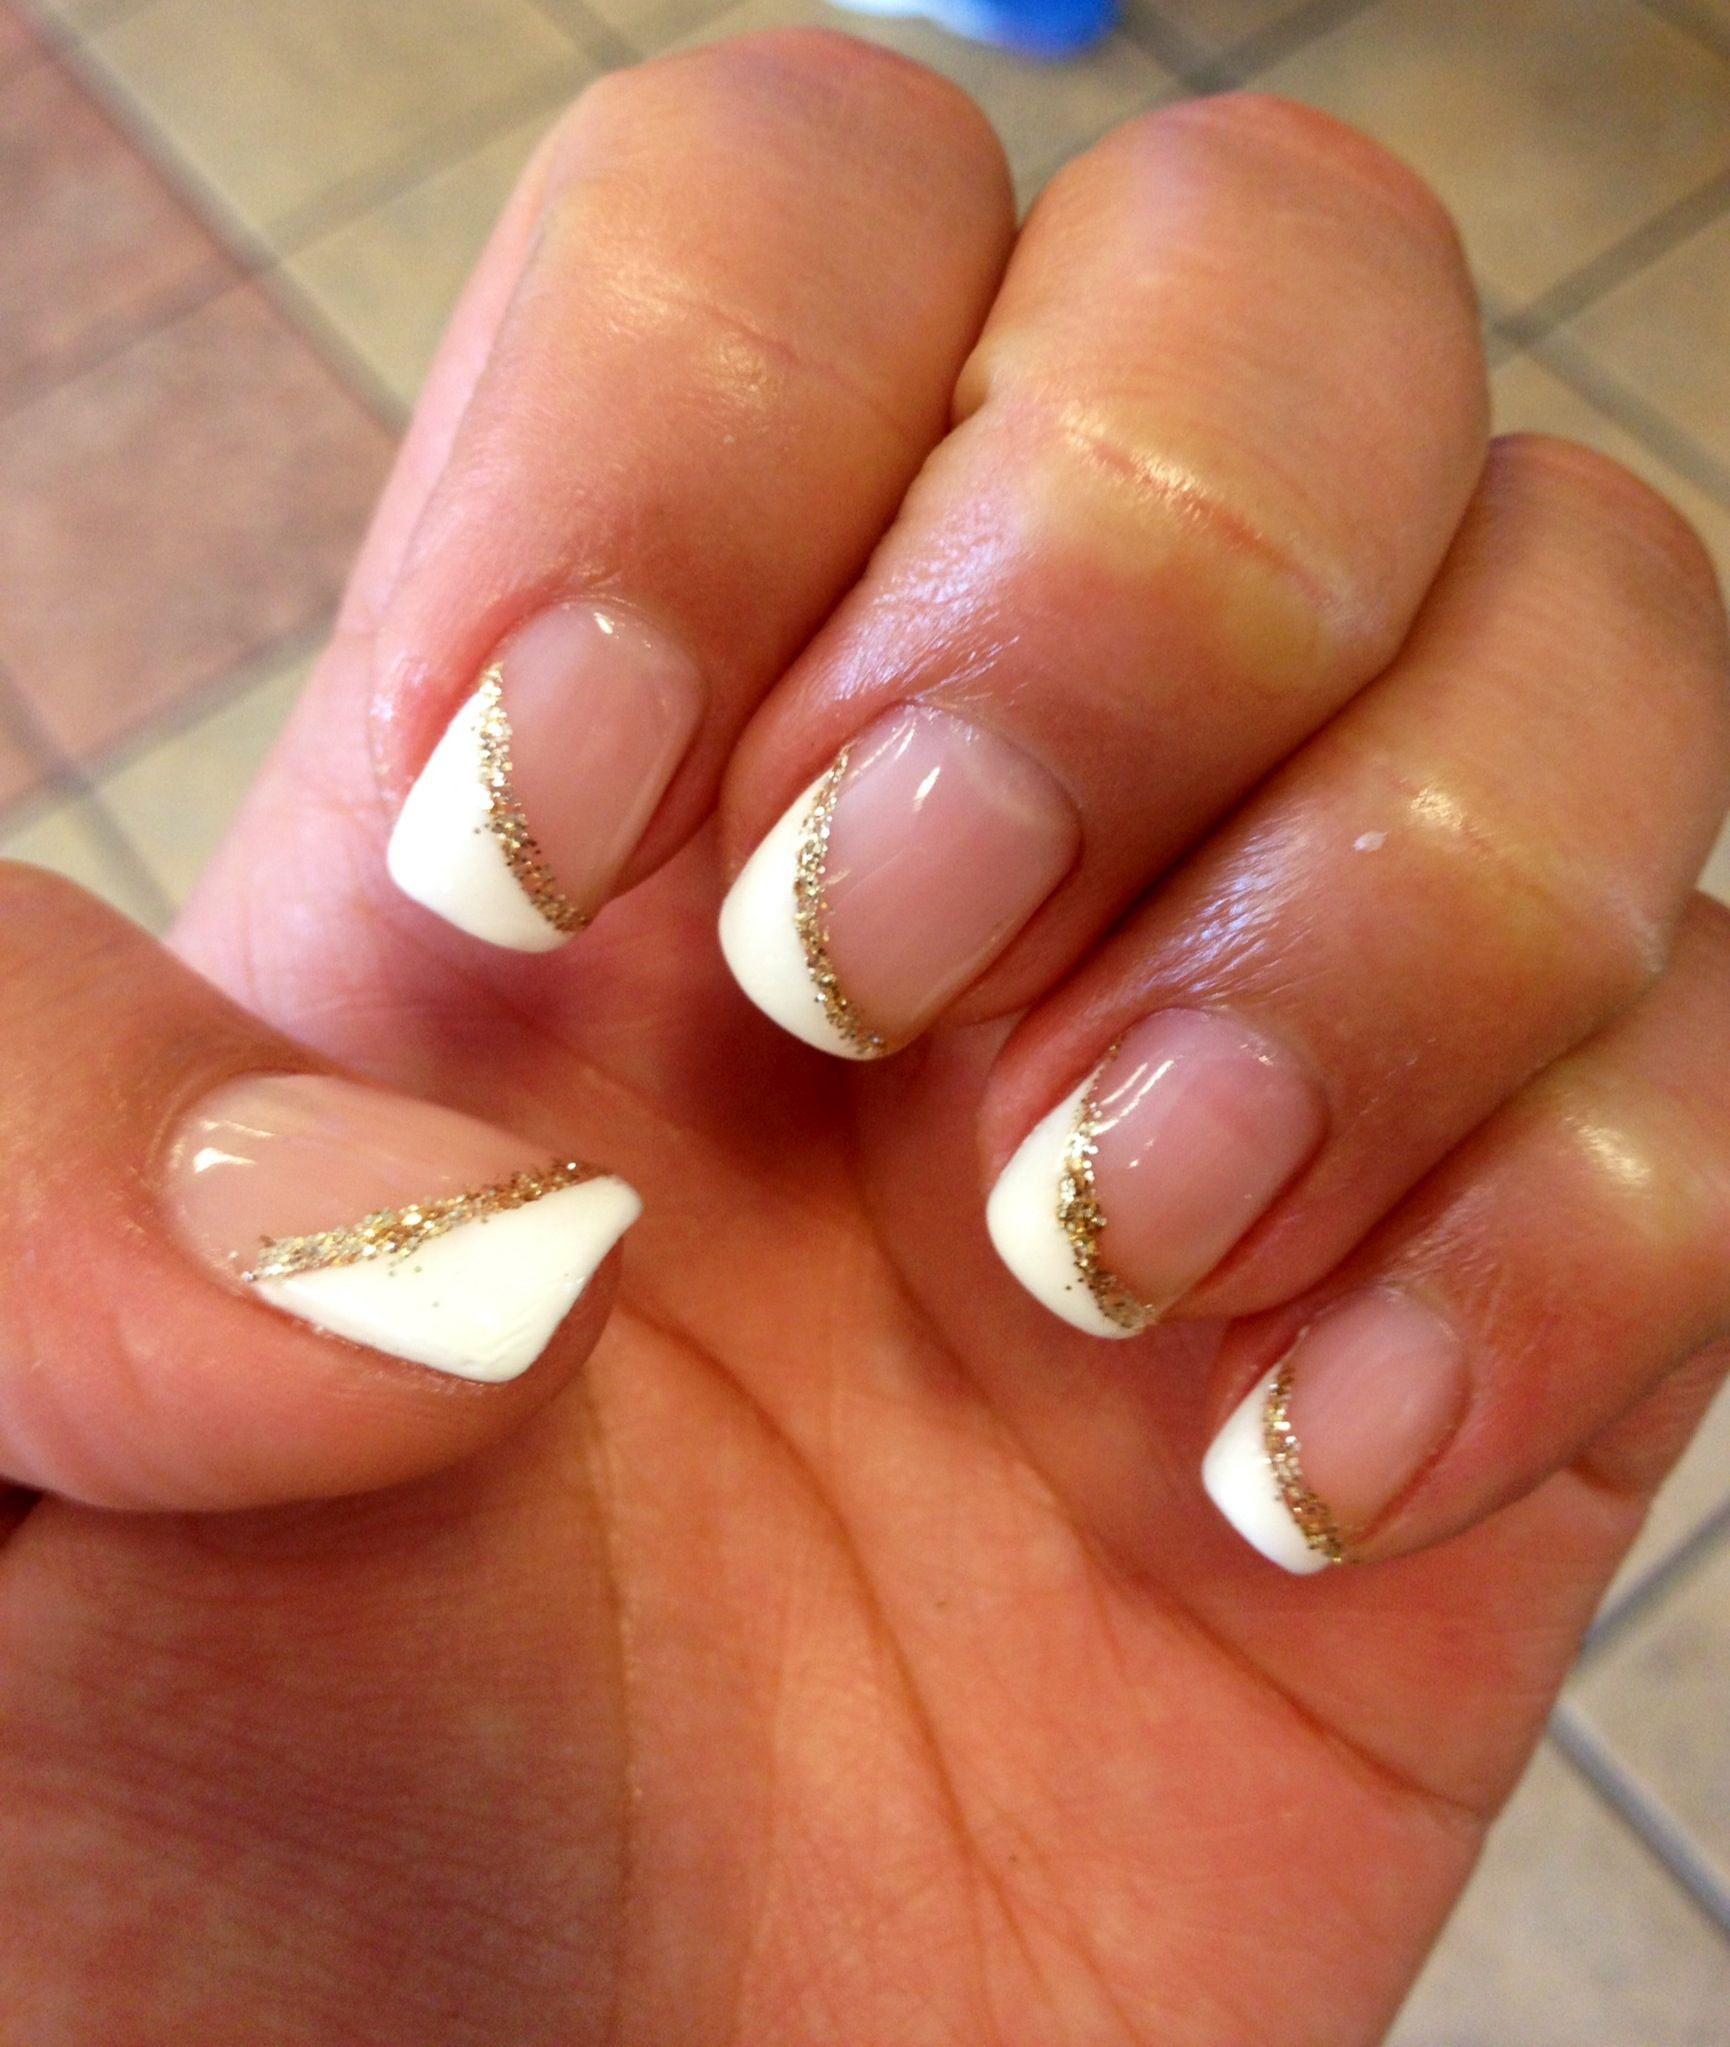 French Tip Wedding Nails
 My beautiful angled french tip Wedding Nails